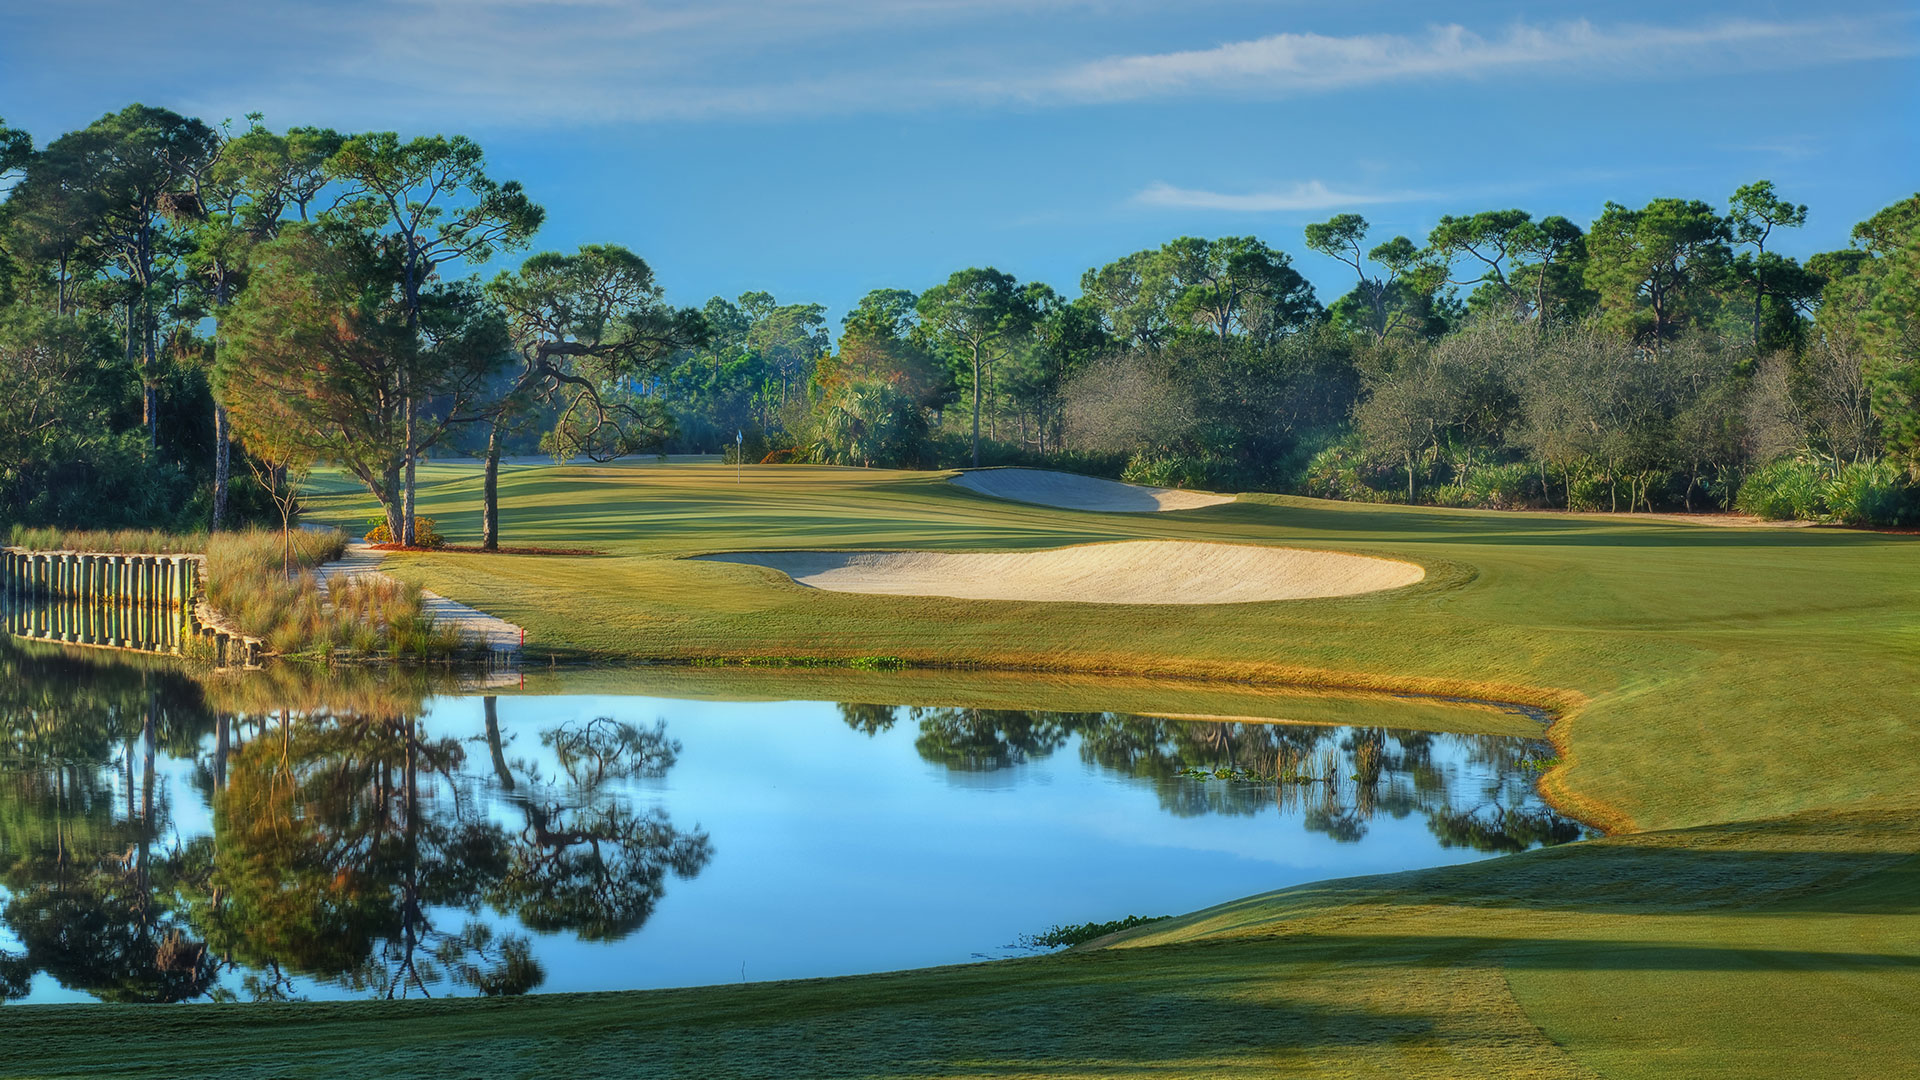 Floridian National Golf Club– Golf Course, Learning Center & Tournaments